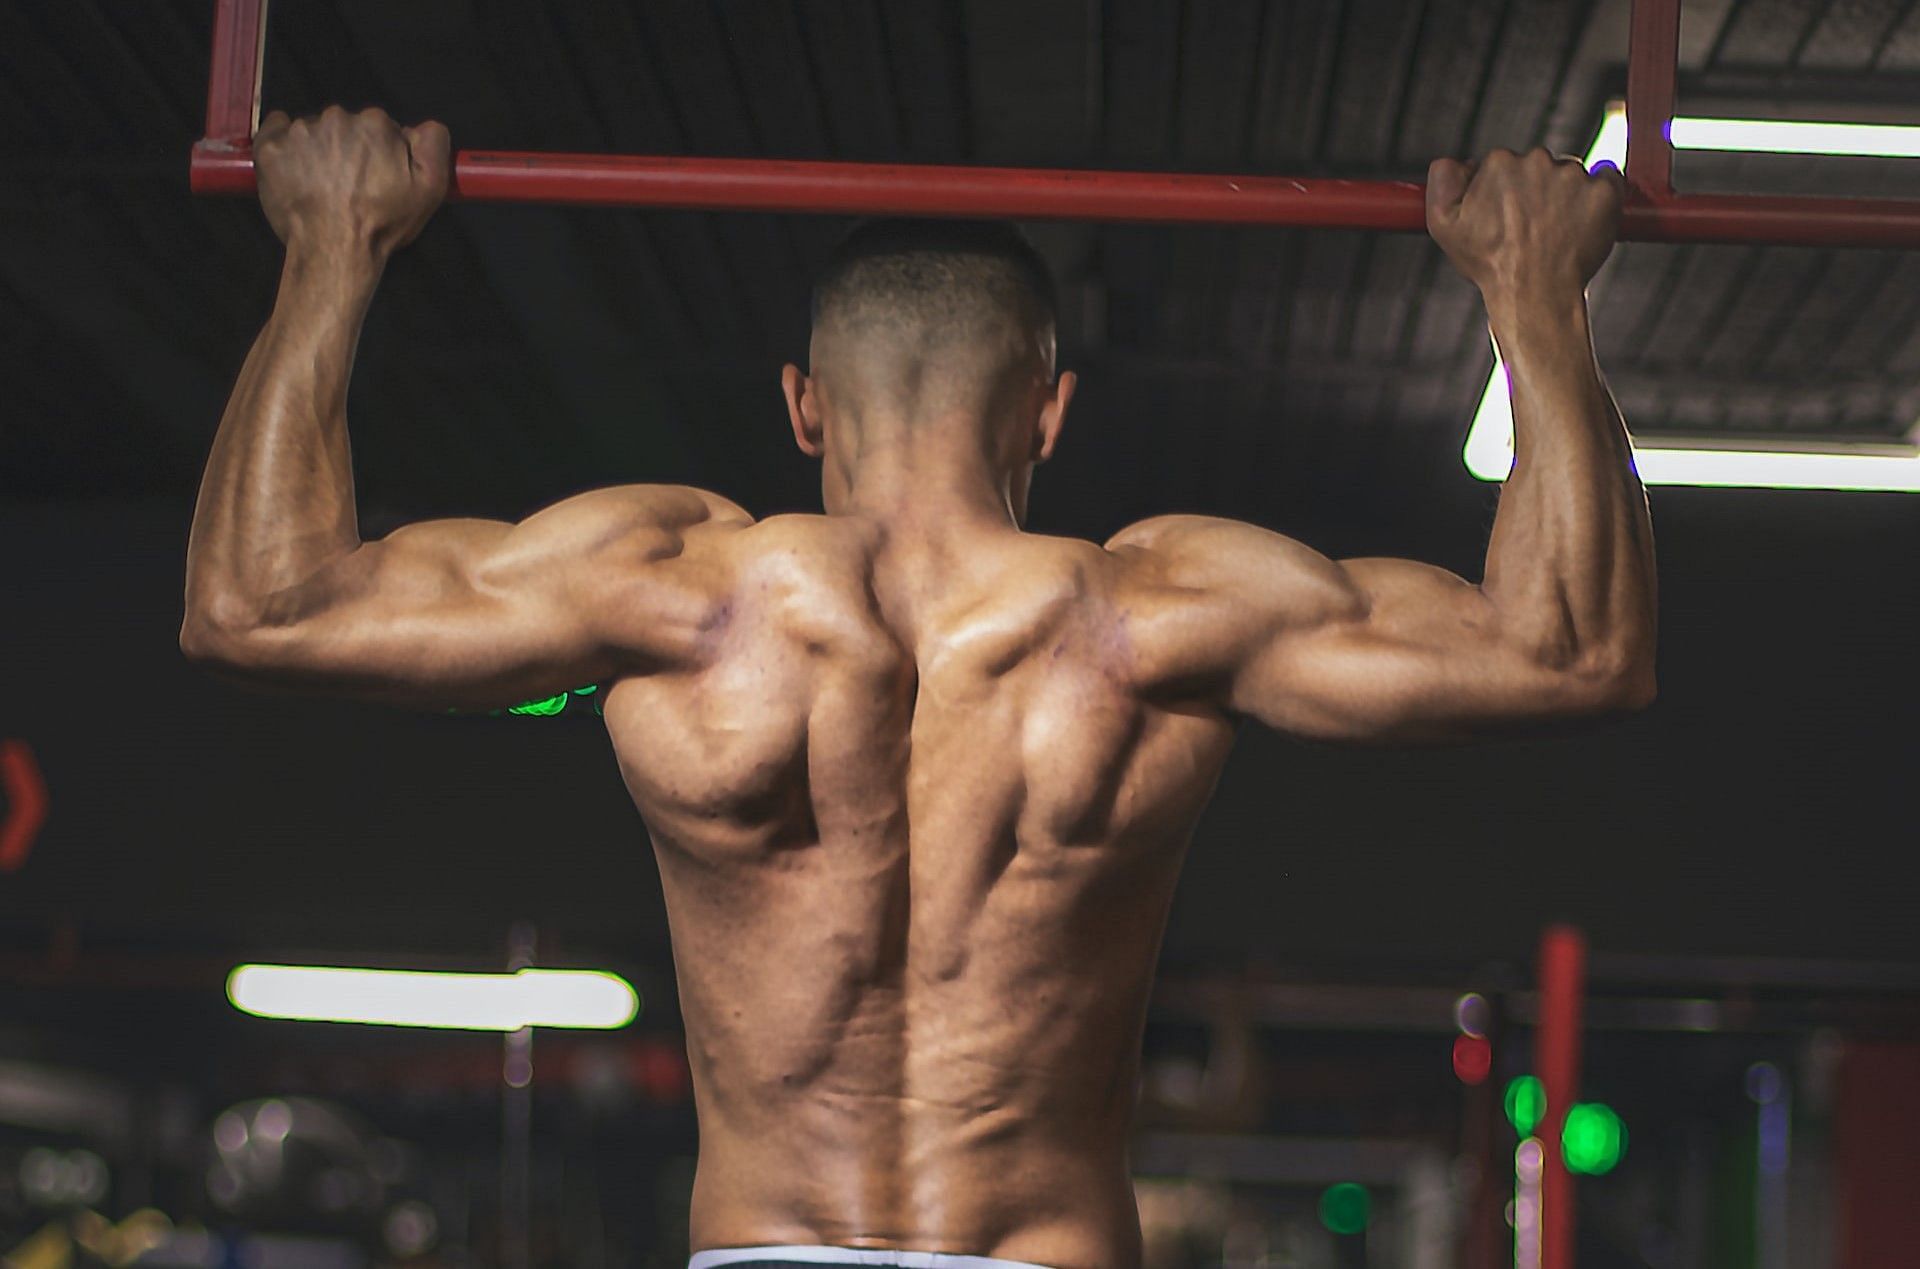 Back superset exercises to add strength and mass. (Photo by mob alizadeh on Unsplash)